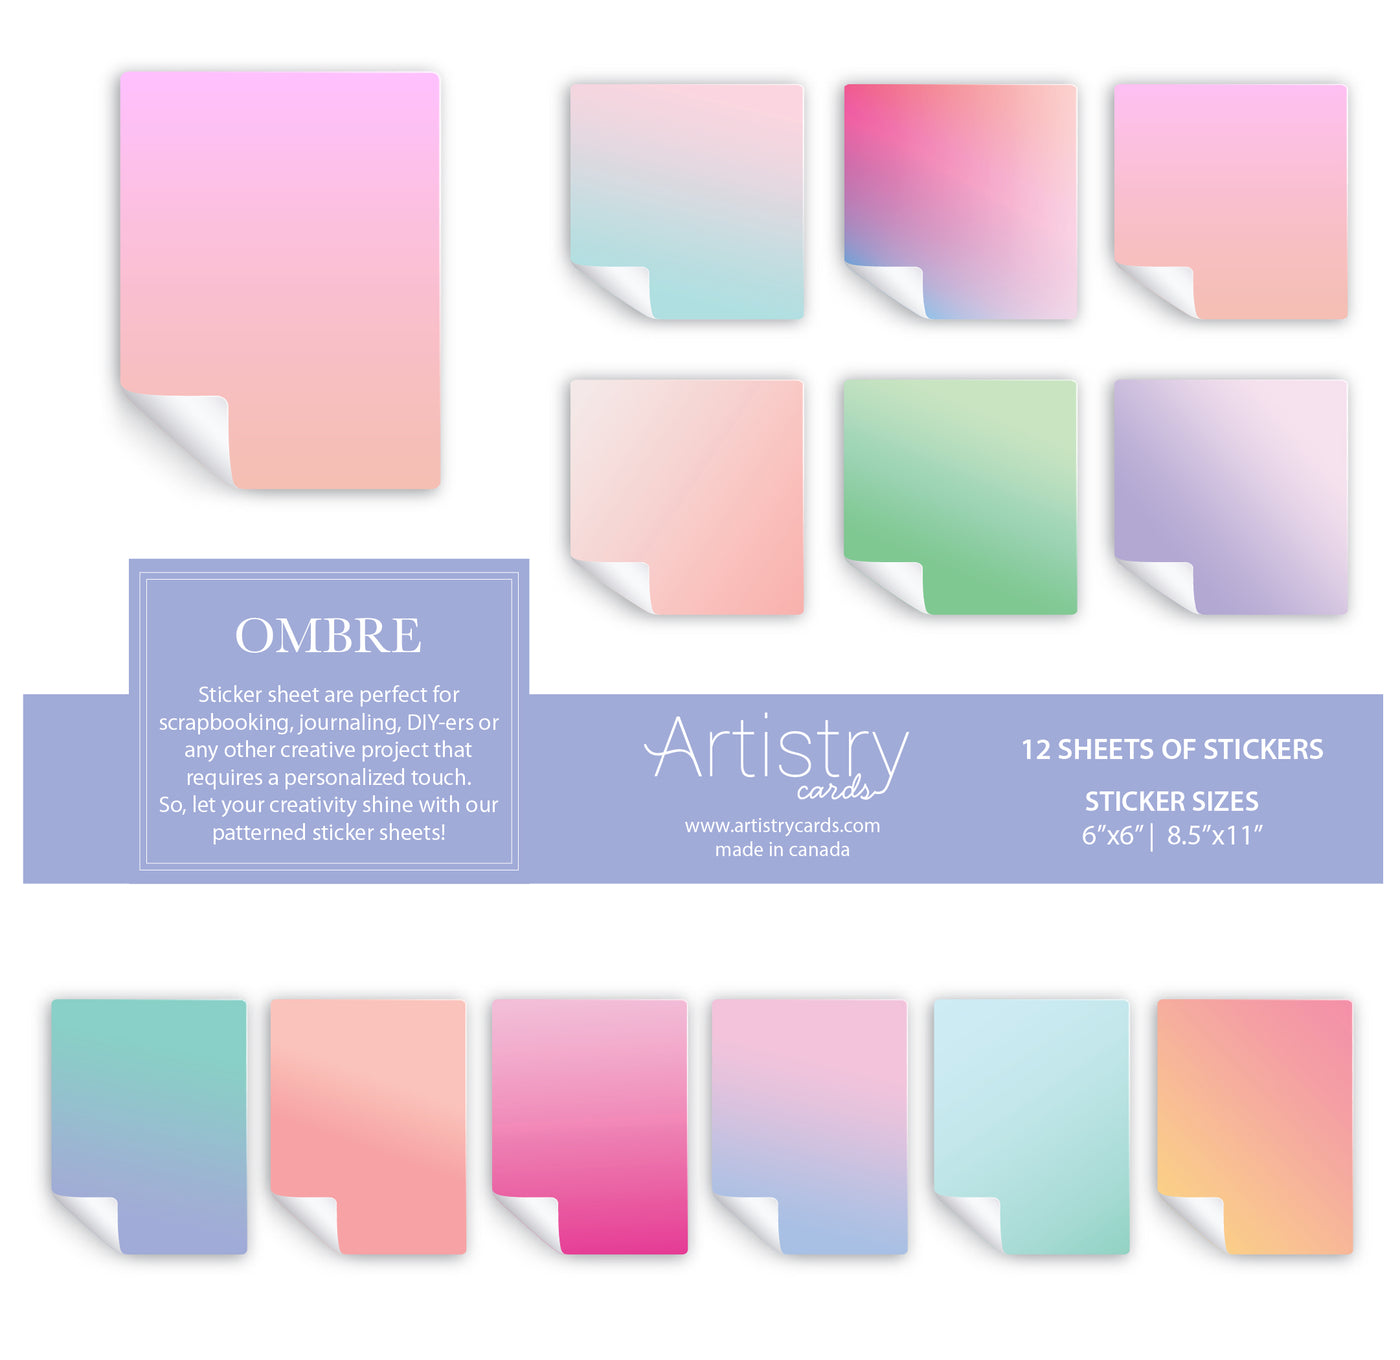 Ombre Sticker Sheets